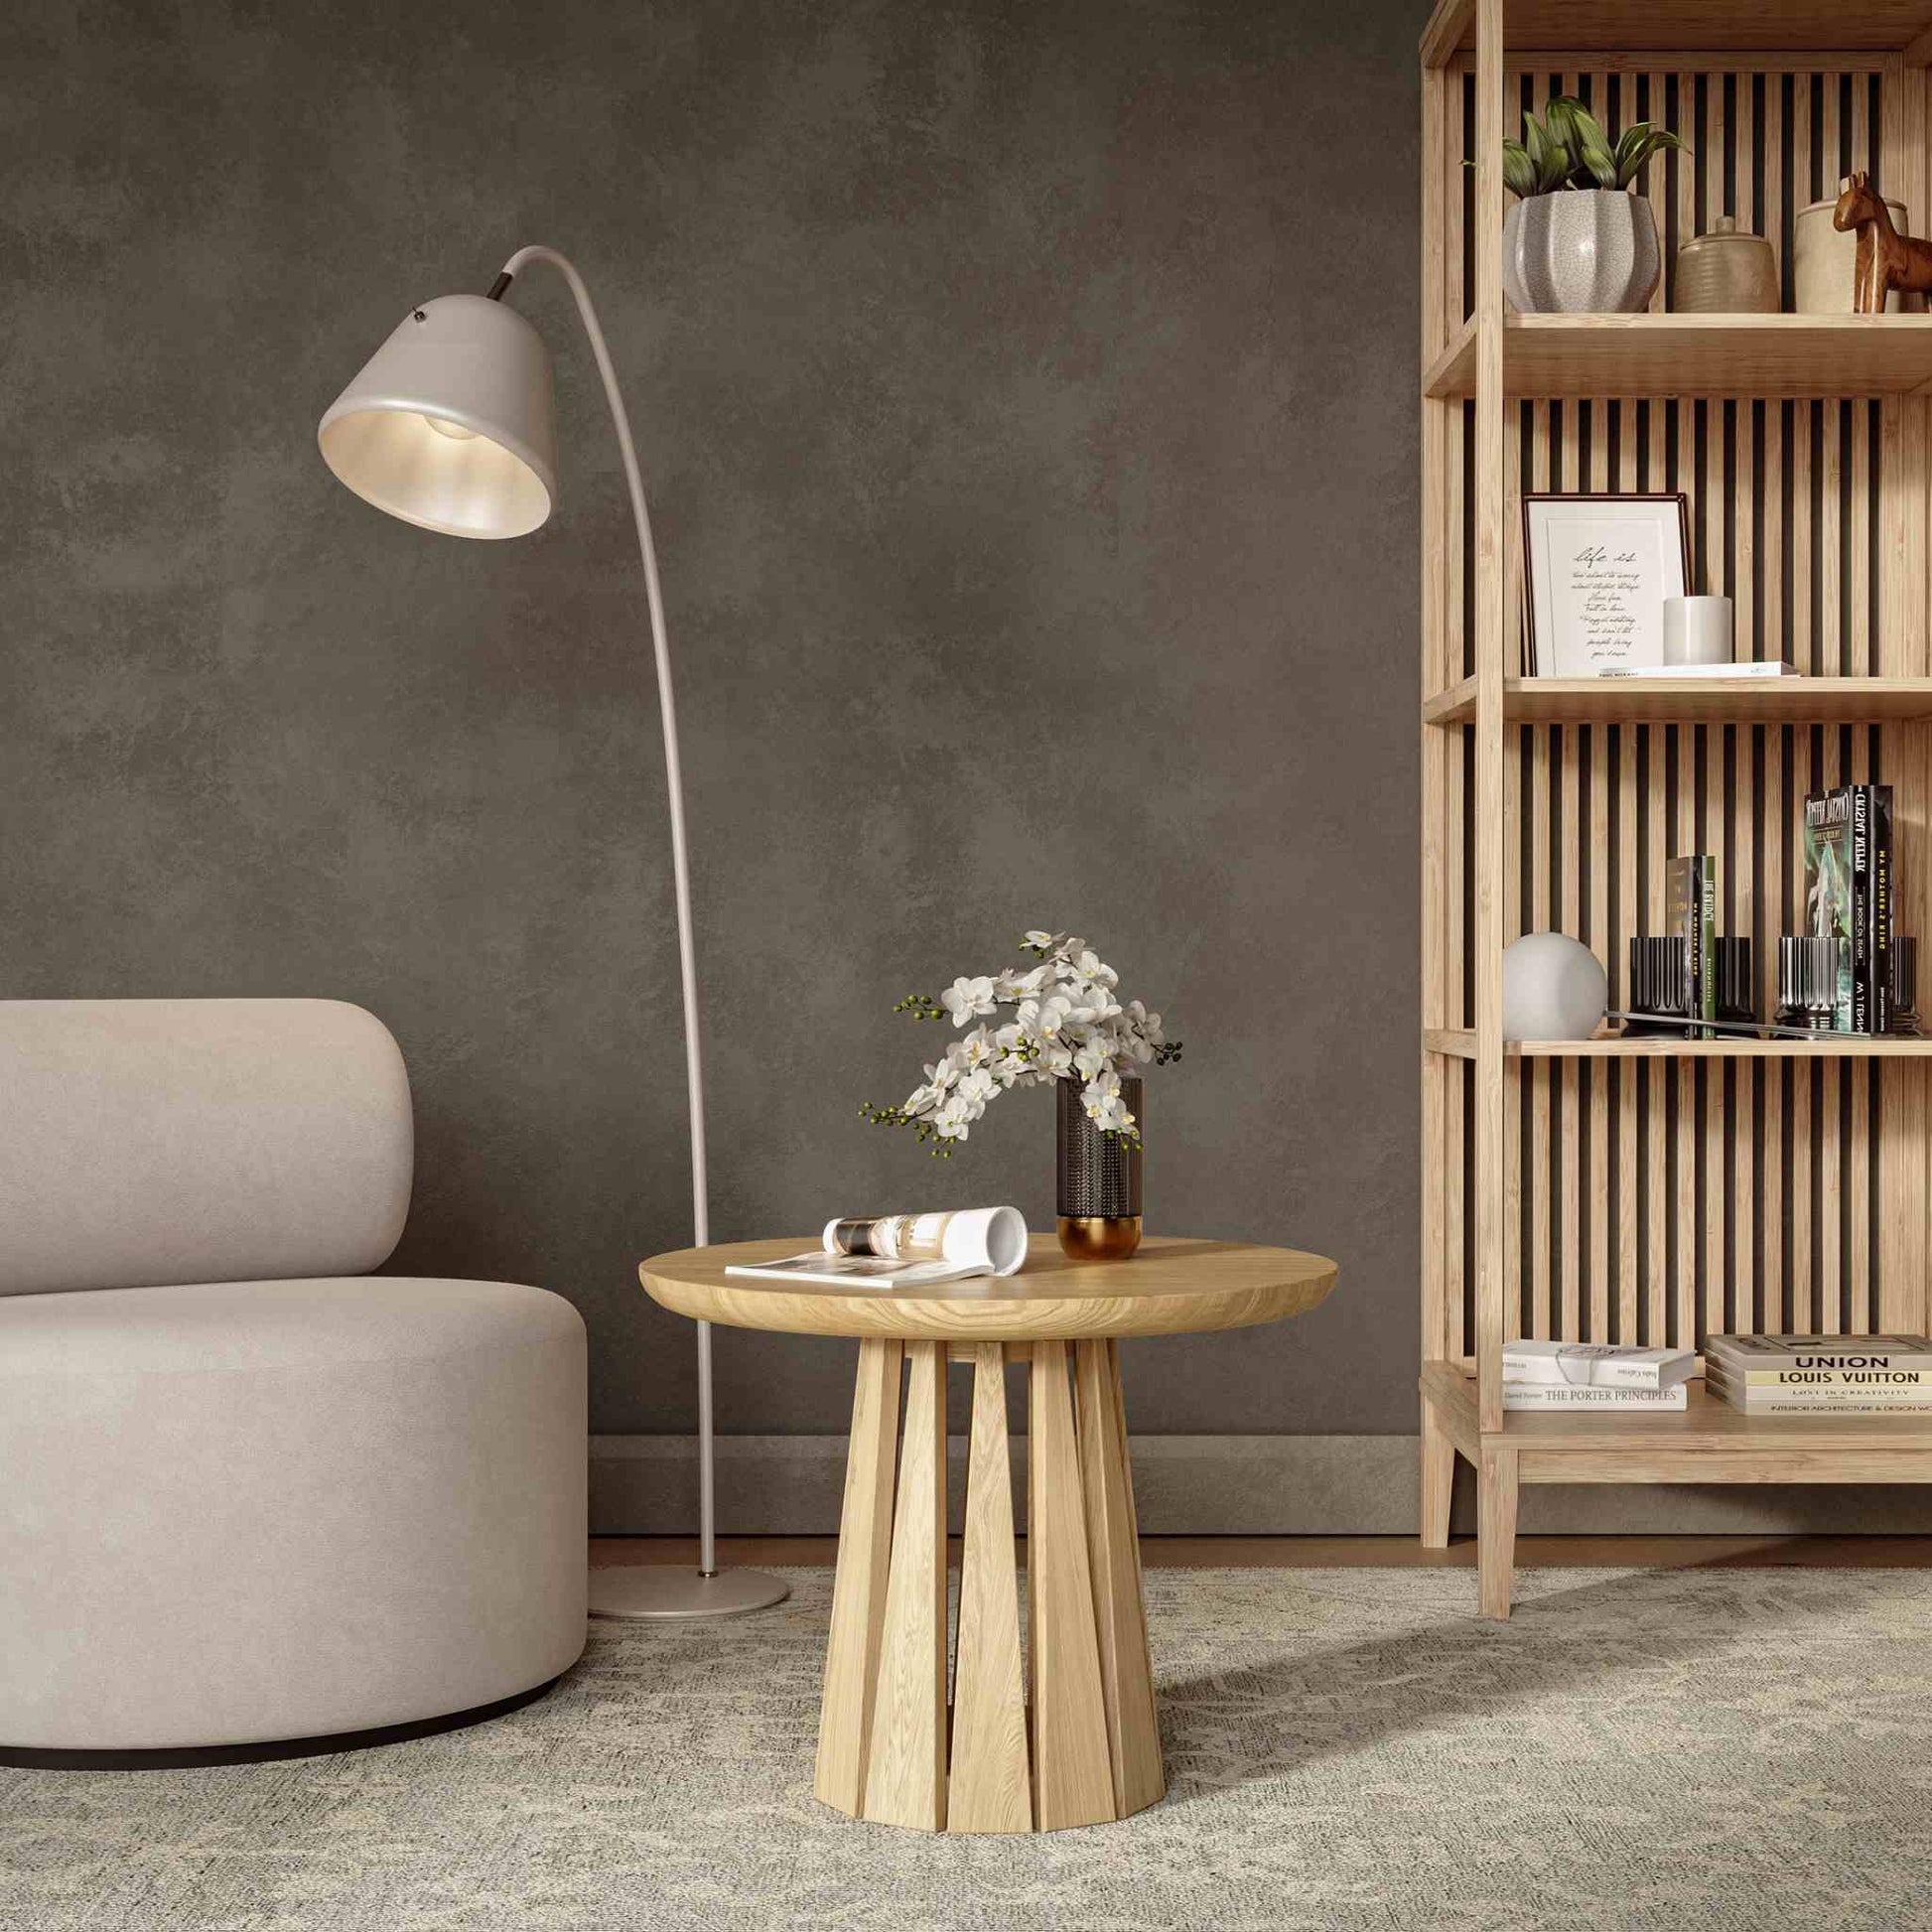 Interior arrangement with the Round Rigi Coffee Table in solid oak wood with a beautiful base